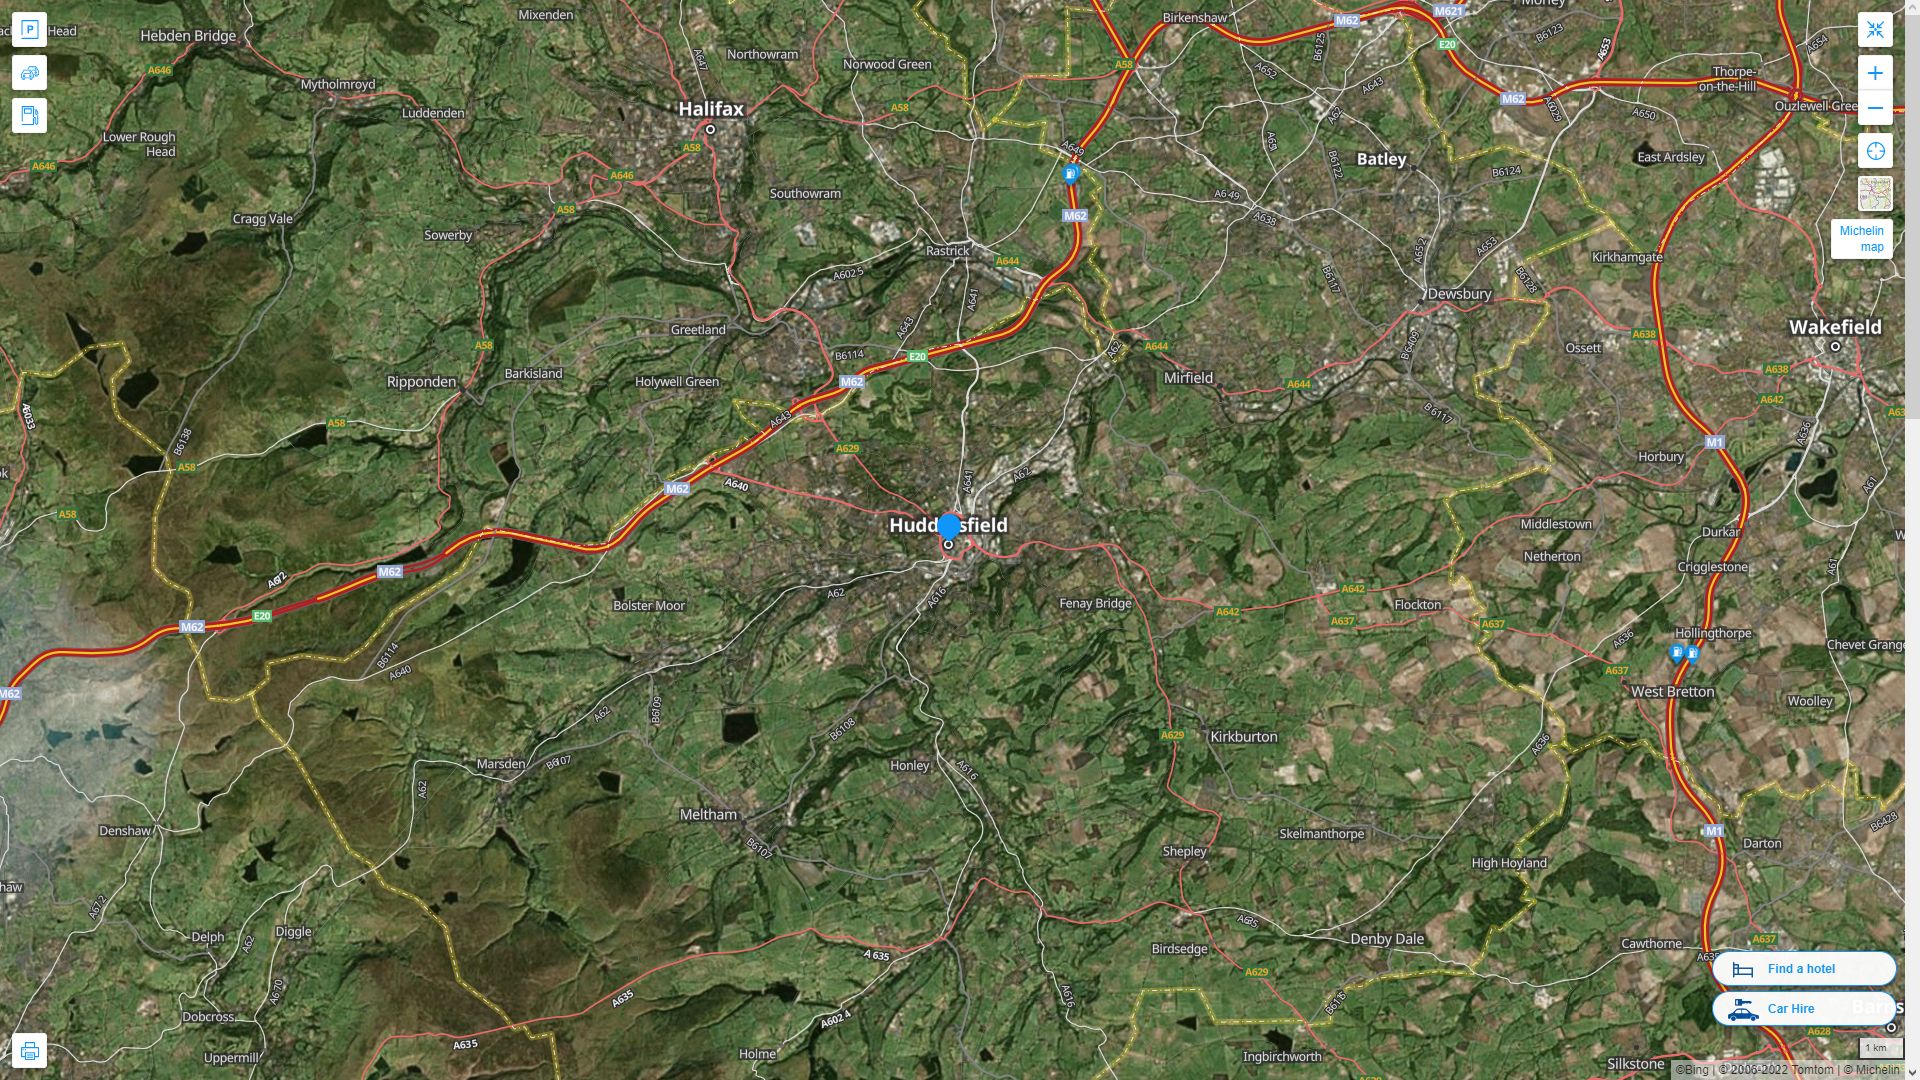 Huddersfield Highway and Road Map with Satellite View